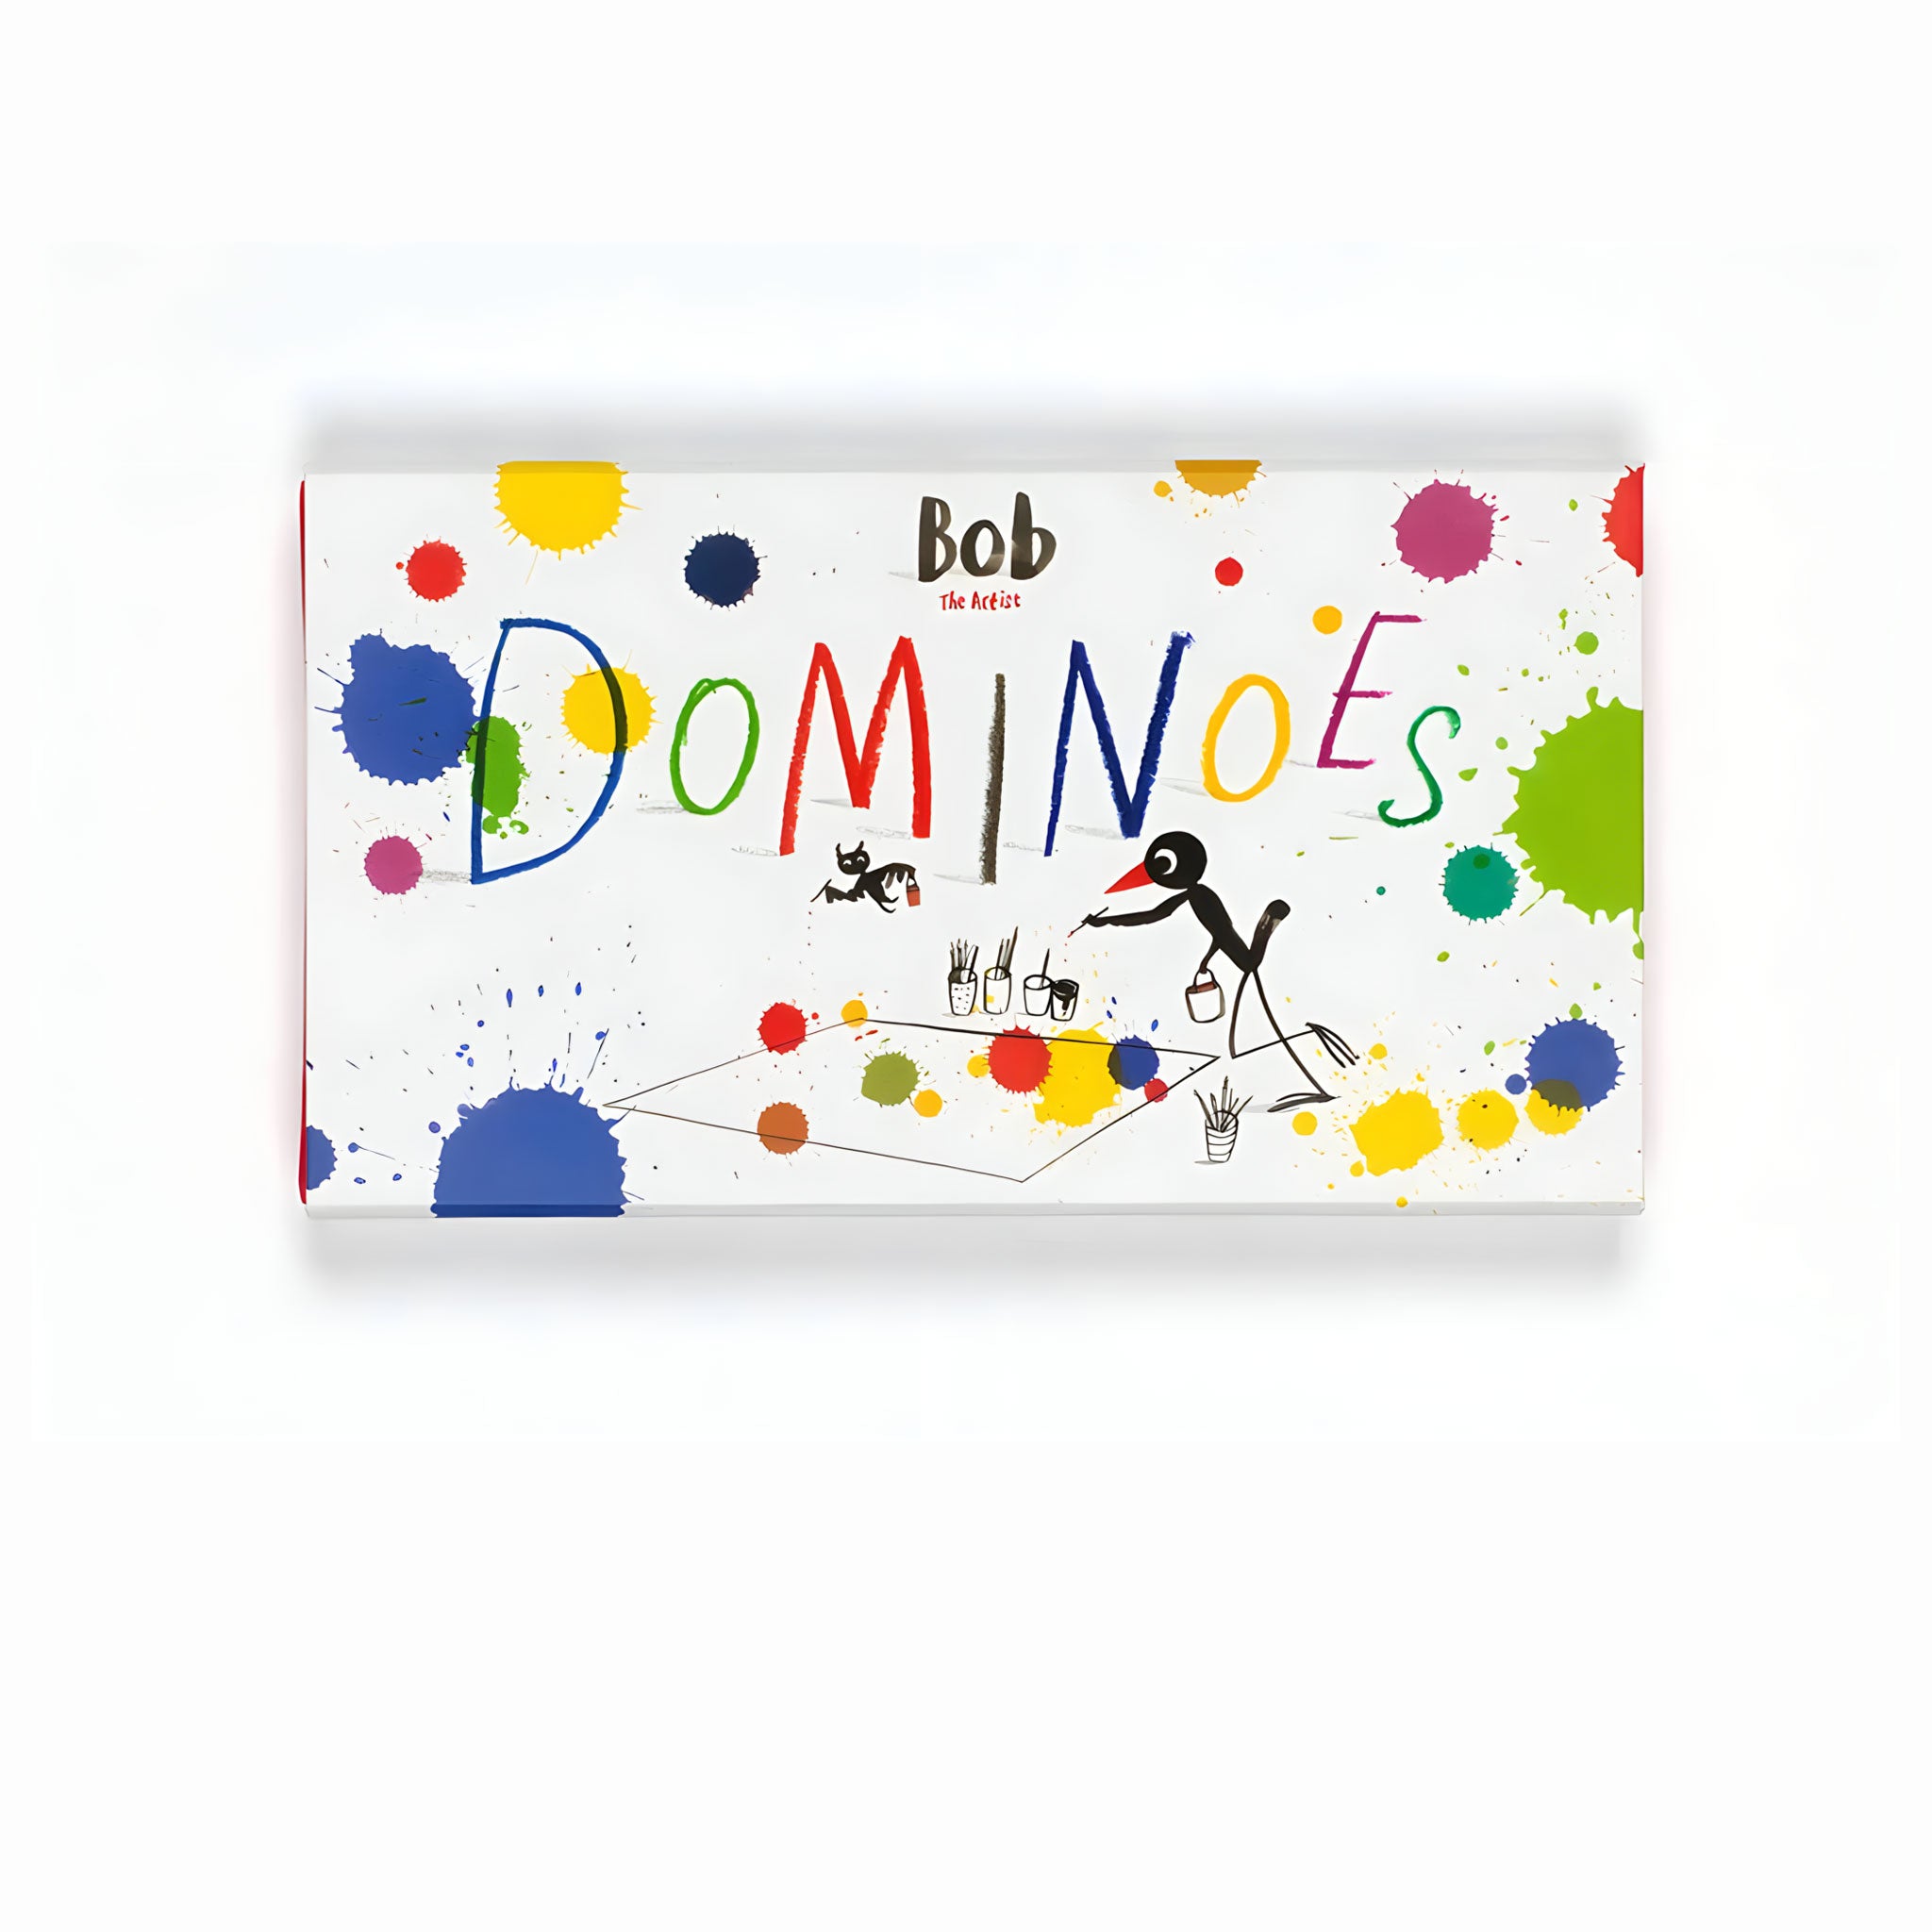 Colorful splotches of paint cover the box for this set of dominoes. The text on the front reads: "Bob The Artist: DOMINOES". Below the text is a cartoonish illustration of an anthropomorphic bird making a painting on the floor.